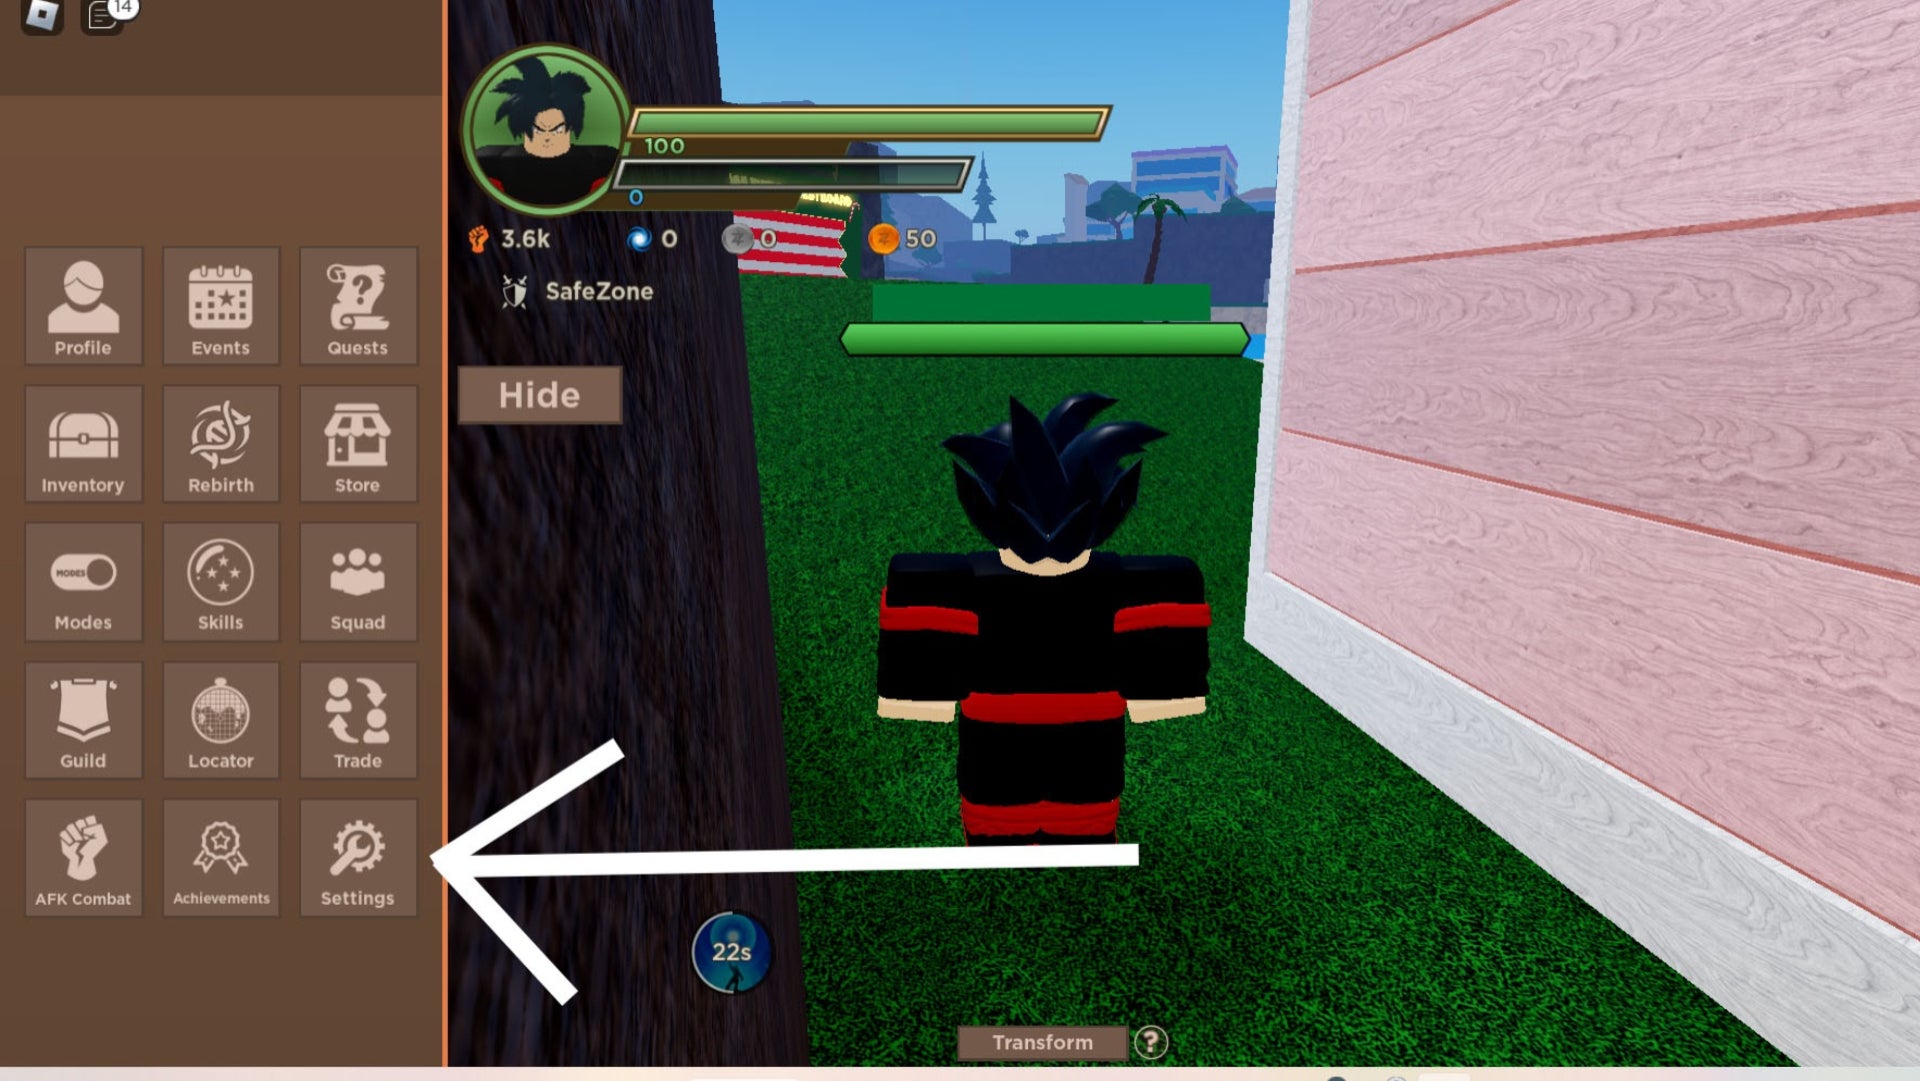 dragon blox main menu, an arrow is pointing to the settings icon in the menu.